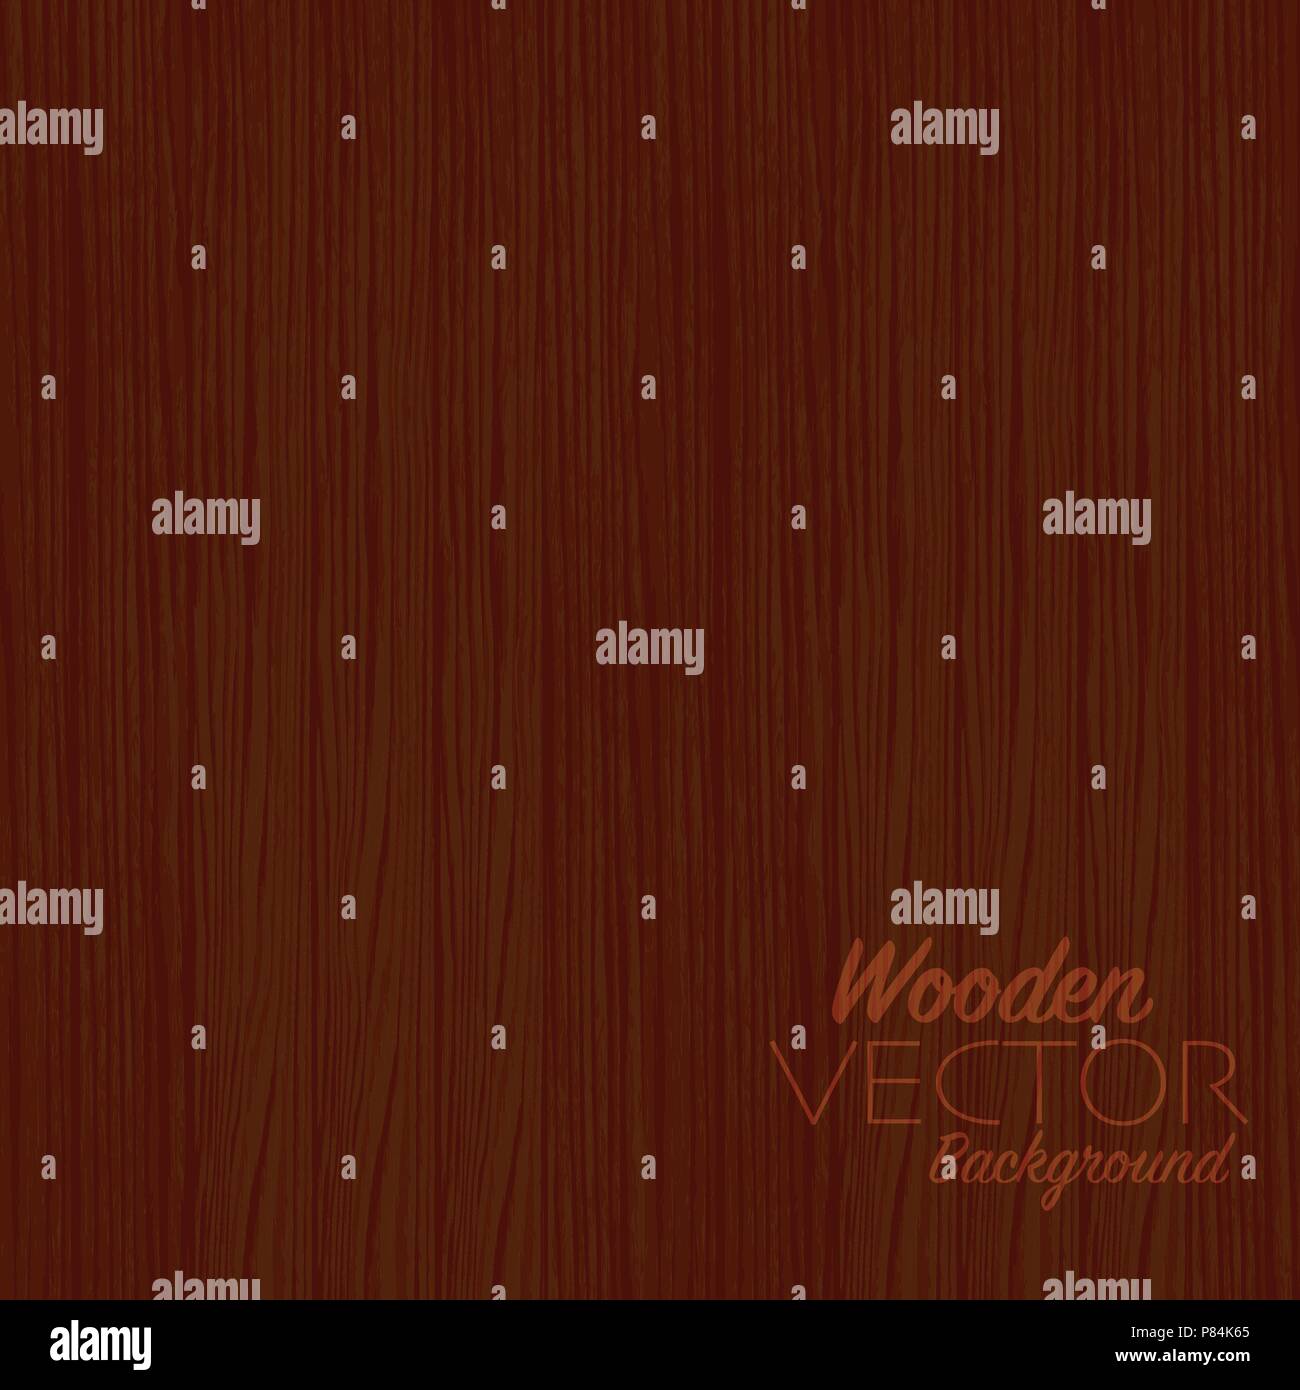 Top view of wooden desktop surface, brown wooden texture for design elements, abstract background vector Illustration. Stock Vector